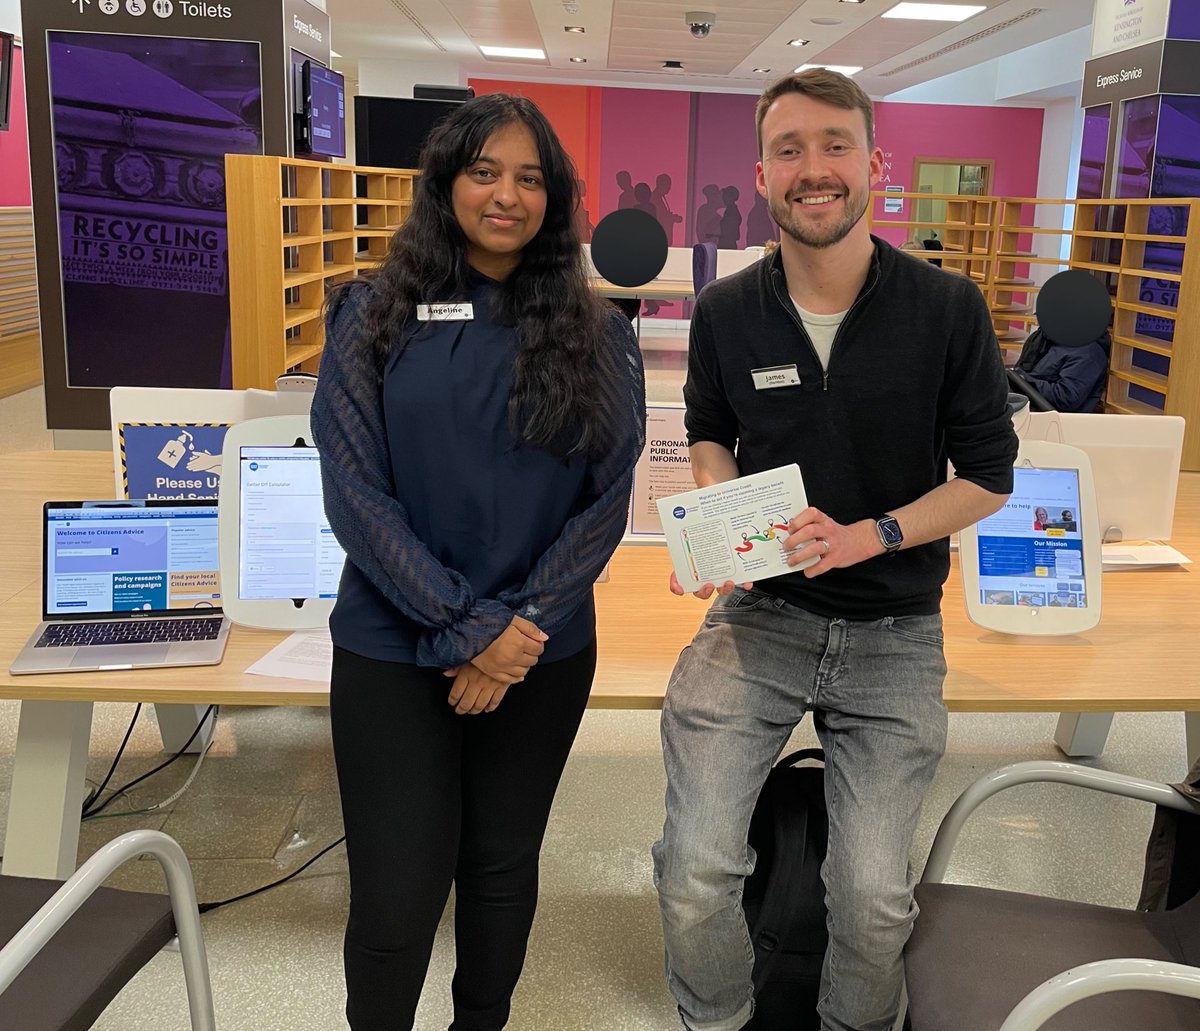 👋 Say hello to our team at Kensington Town Hall’s Help and Advice Hub. ℹ️ We can help you access our benefit calculator, chatbot and online advice at one of the tablets, or speak to our friendly advice team to find a way forward with your issue. 📆 Wednesdays 11am - 1pm